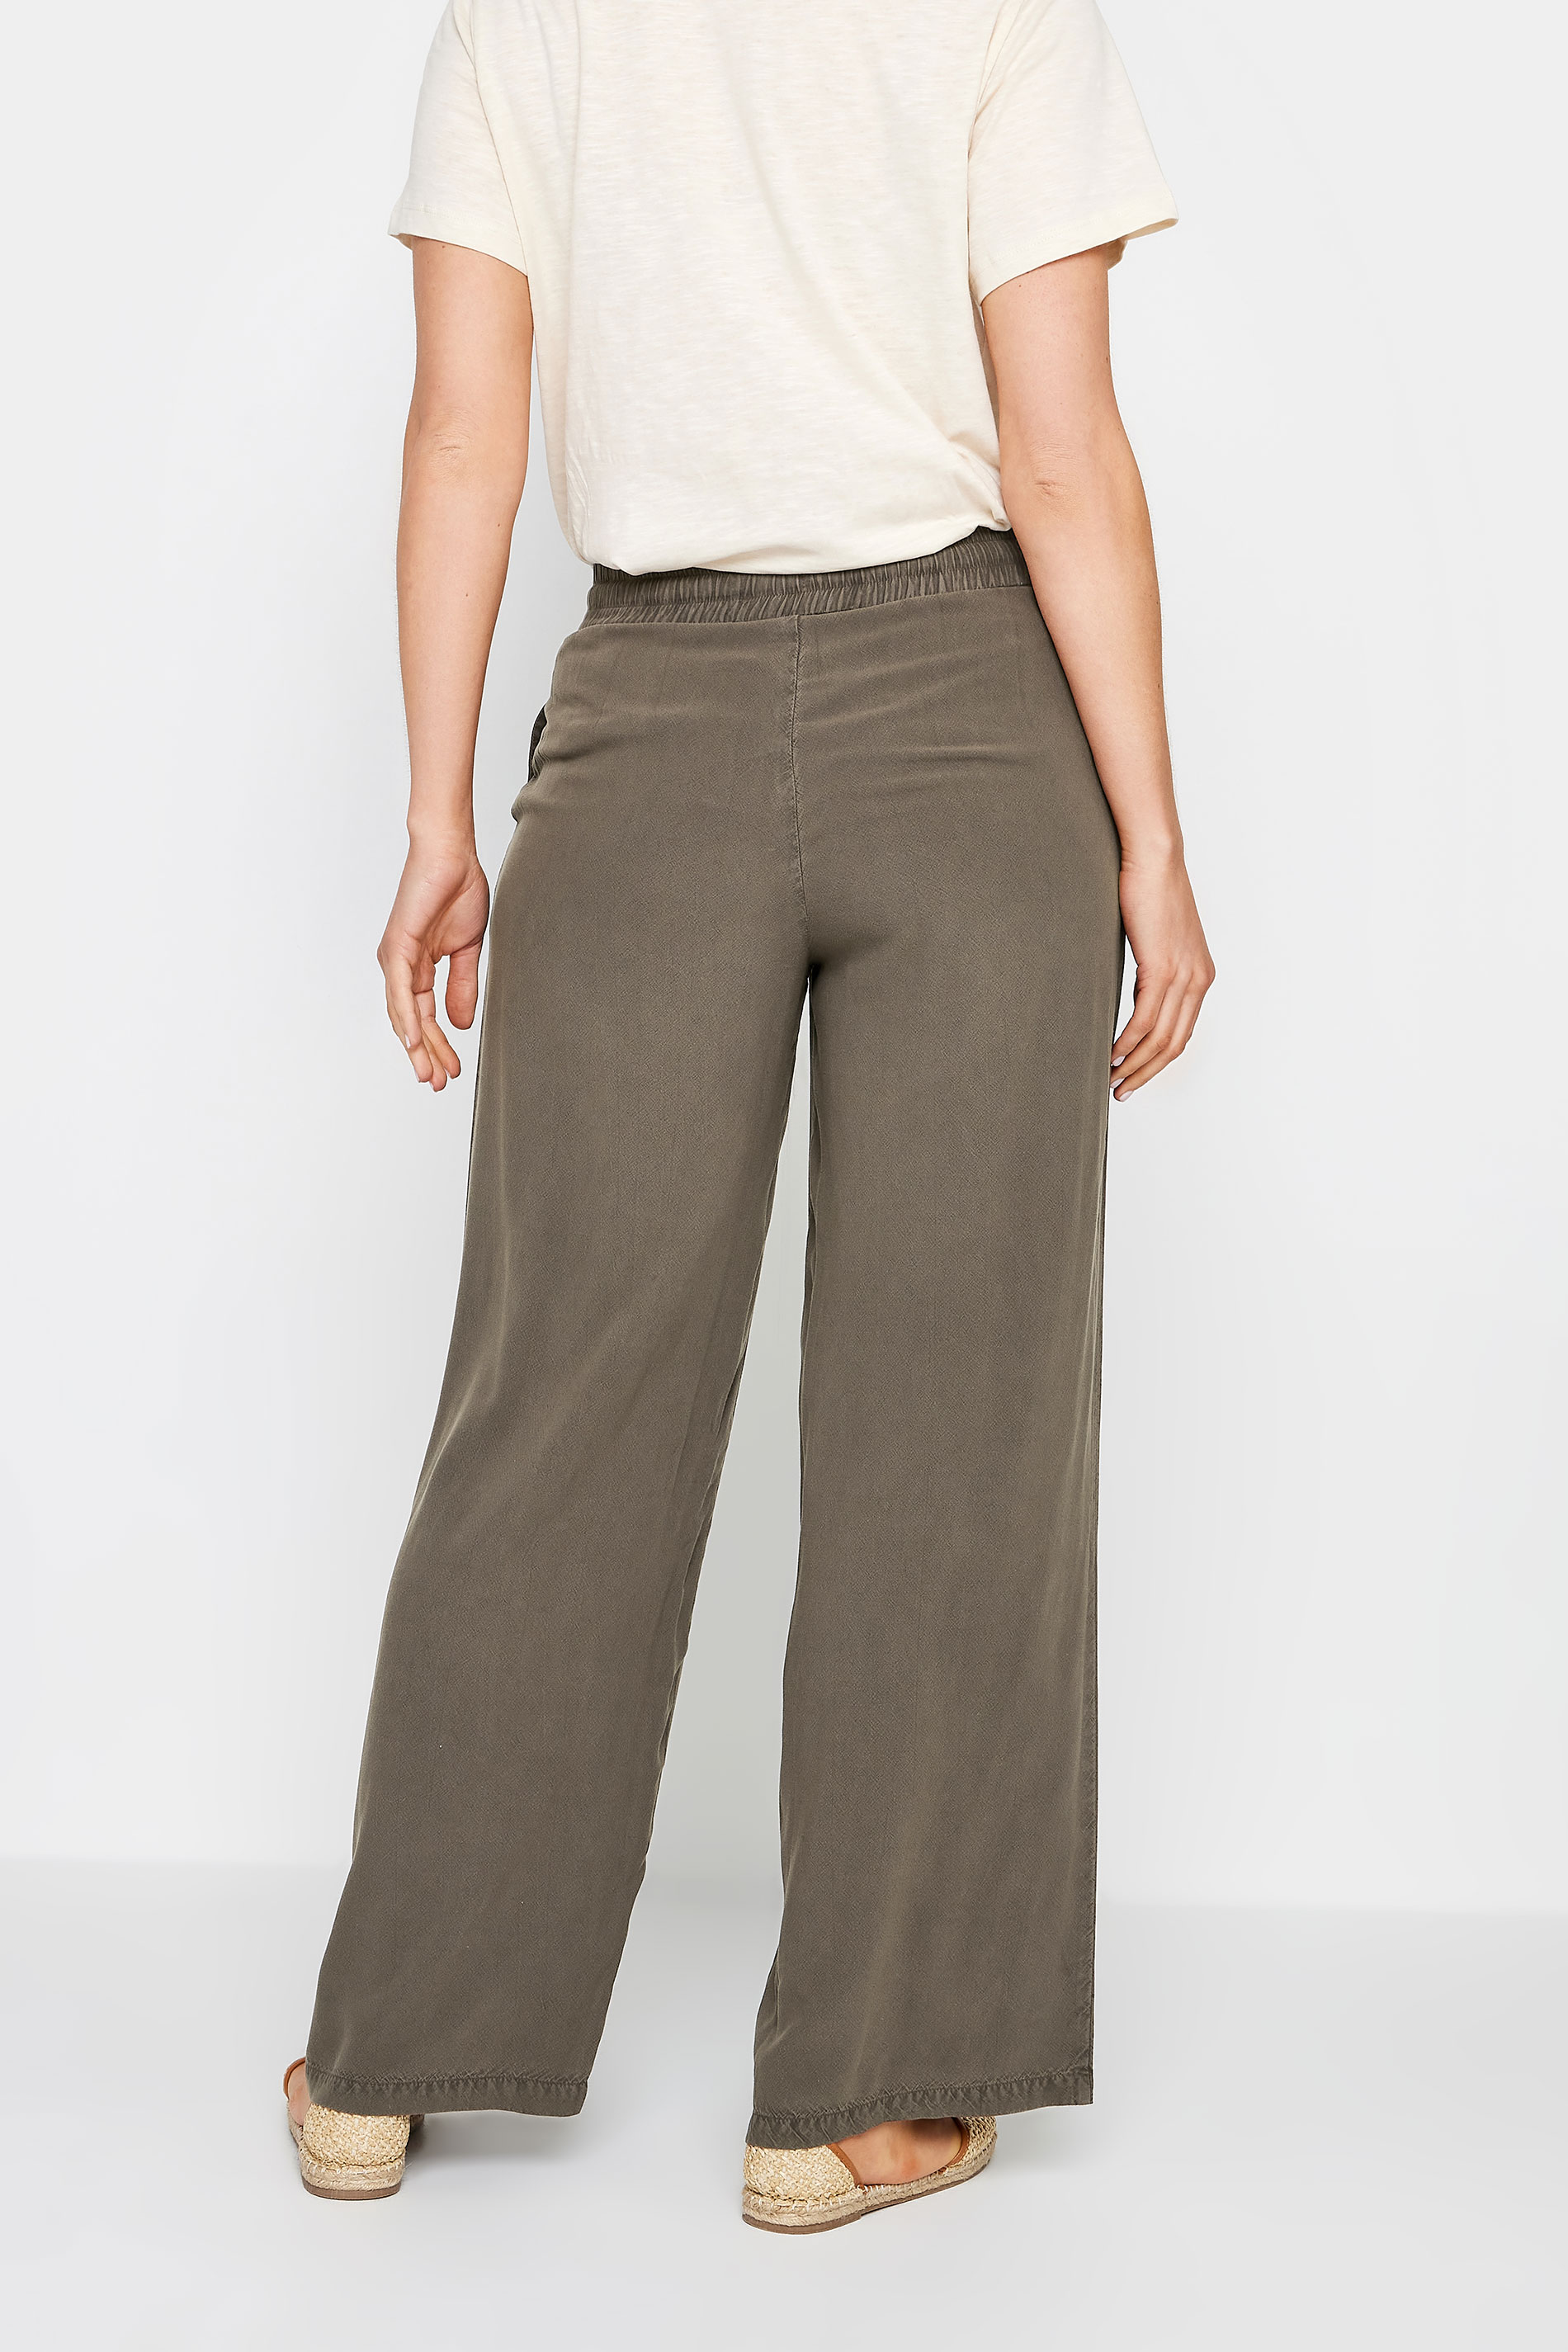 LTS Tall Womens Chocolate Brown Acid Wash Wide Leg Trousers | Long Tall ...